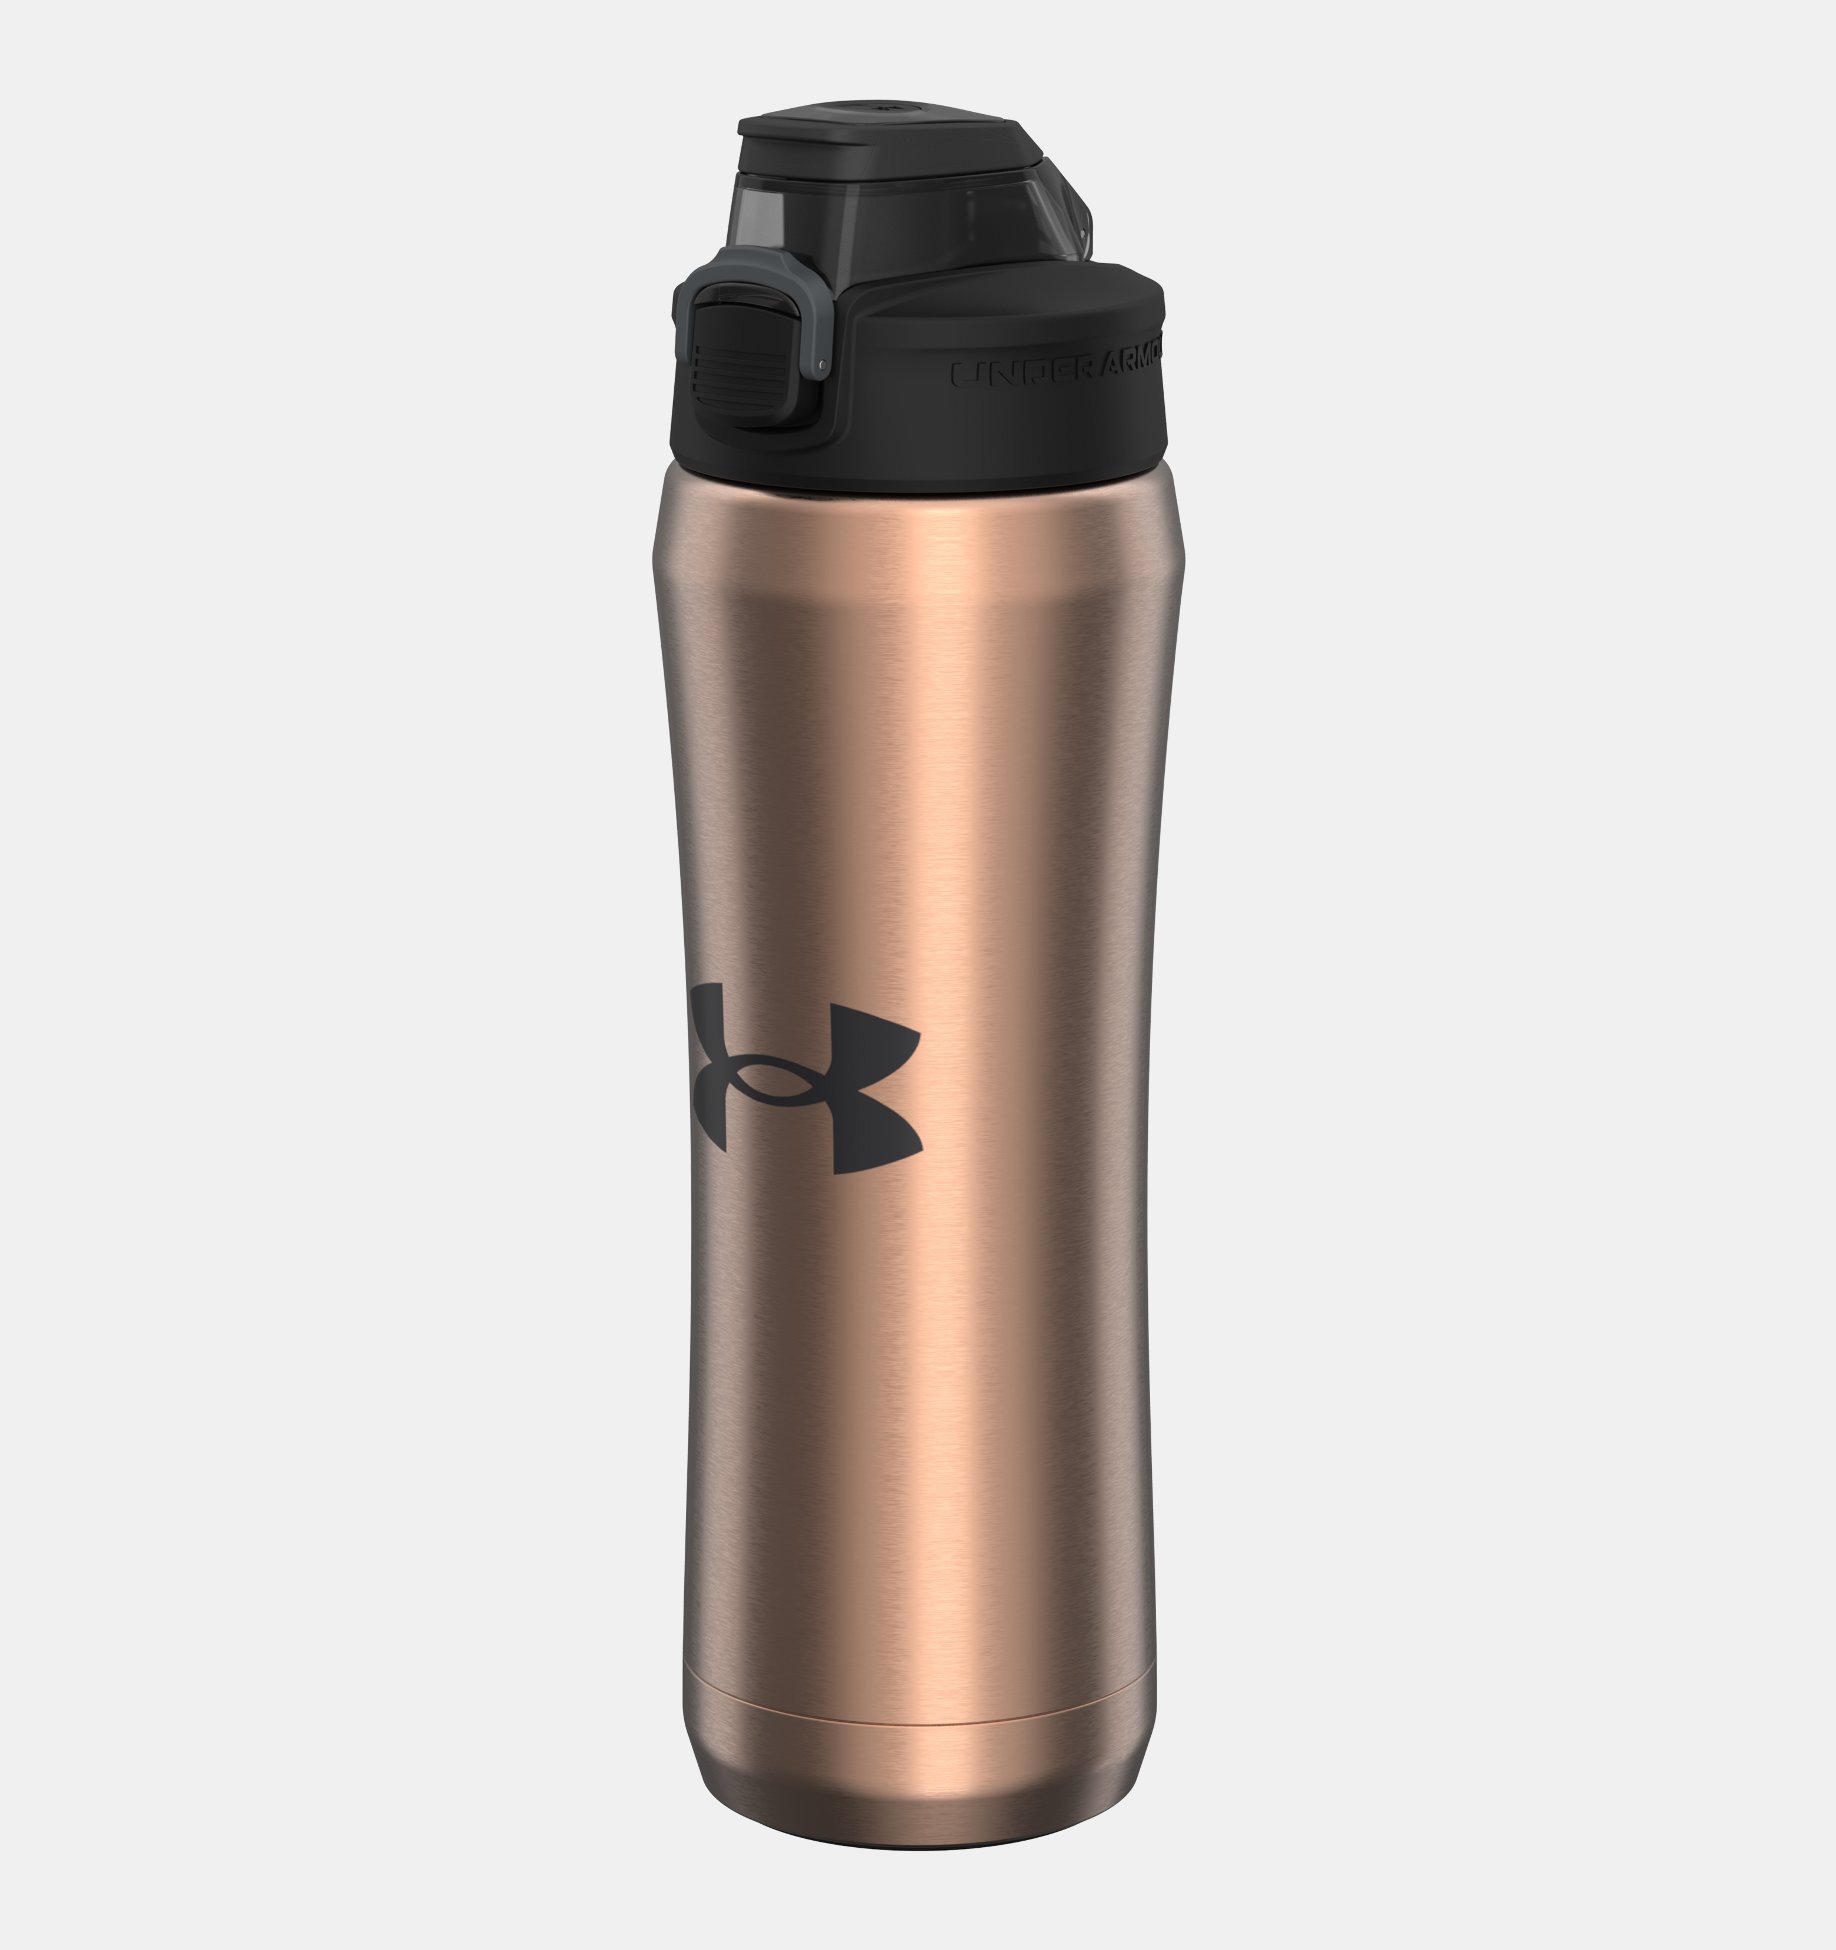 Under Armour US4010BPO4 Chrome Beyond 18 Ounce Vacuum Insulated Stainless Steel Water Hydration Bottle 18oz Beta/Tux Purple/Orange 